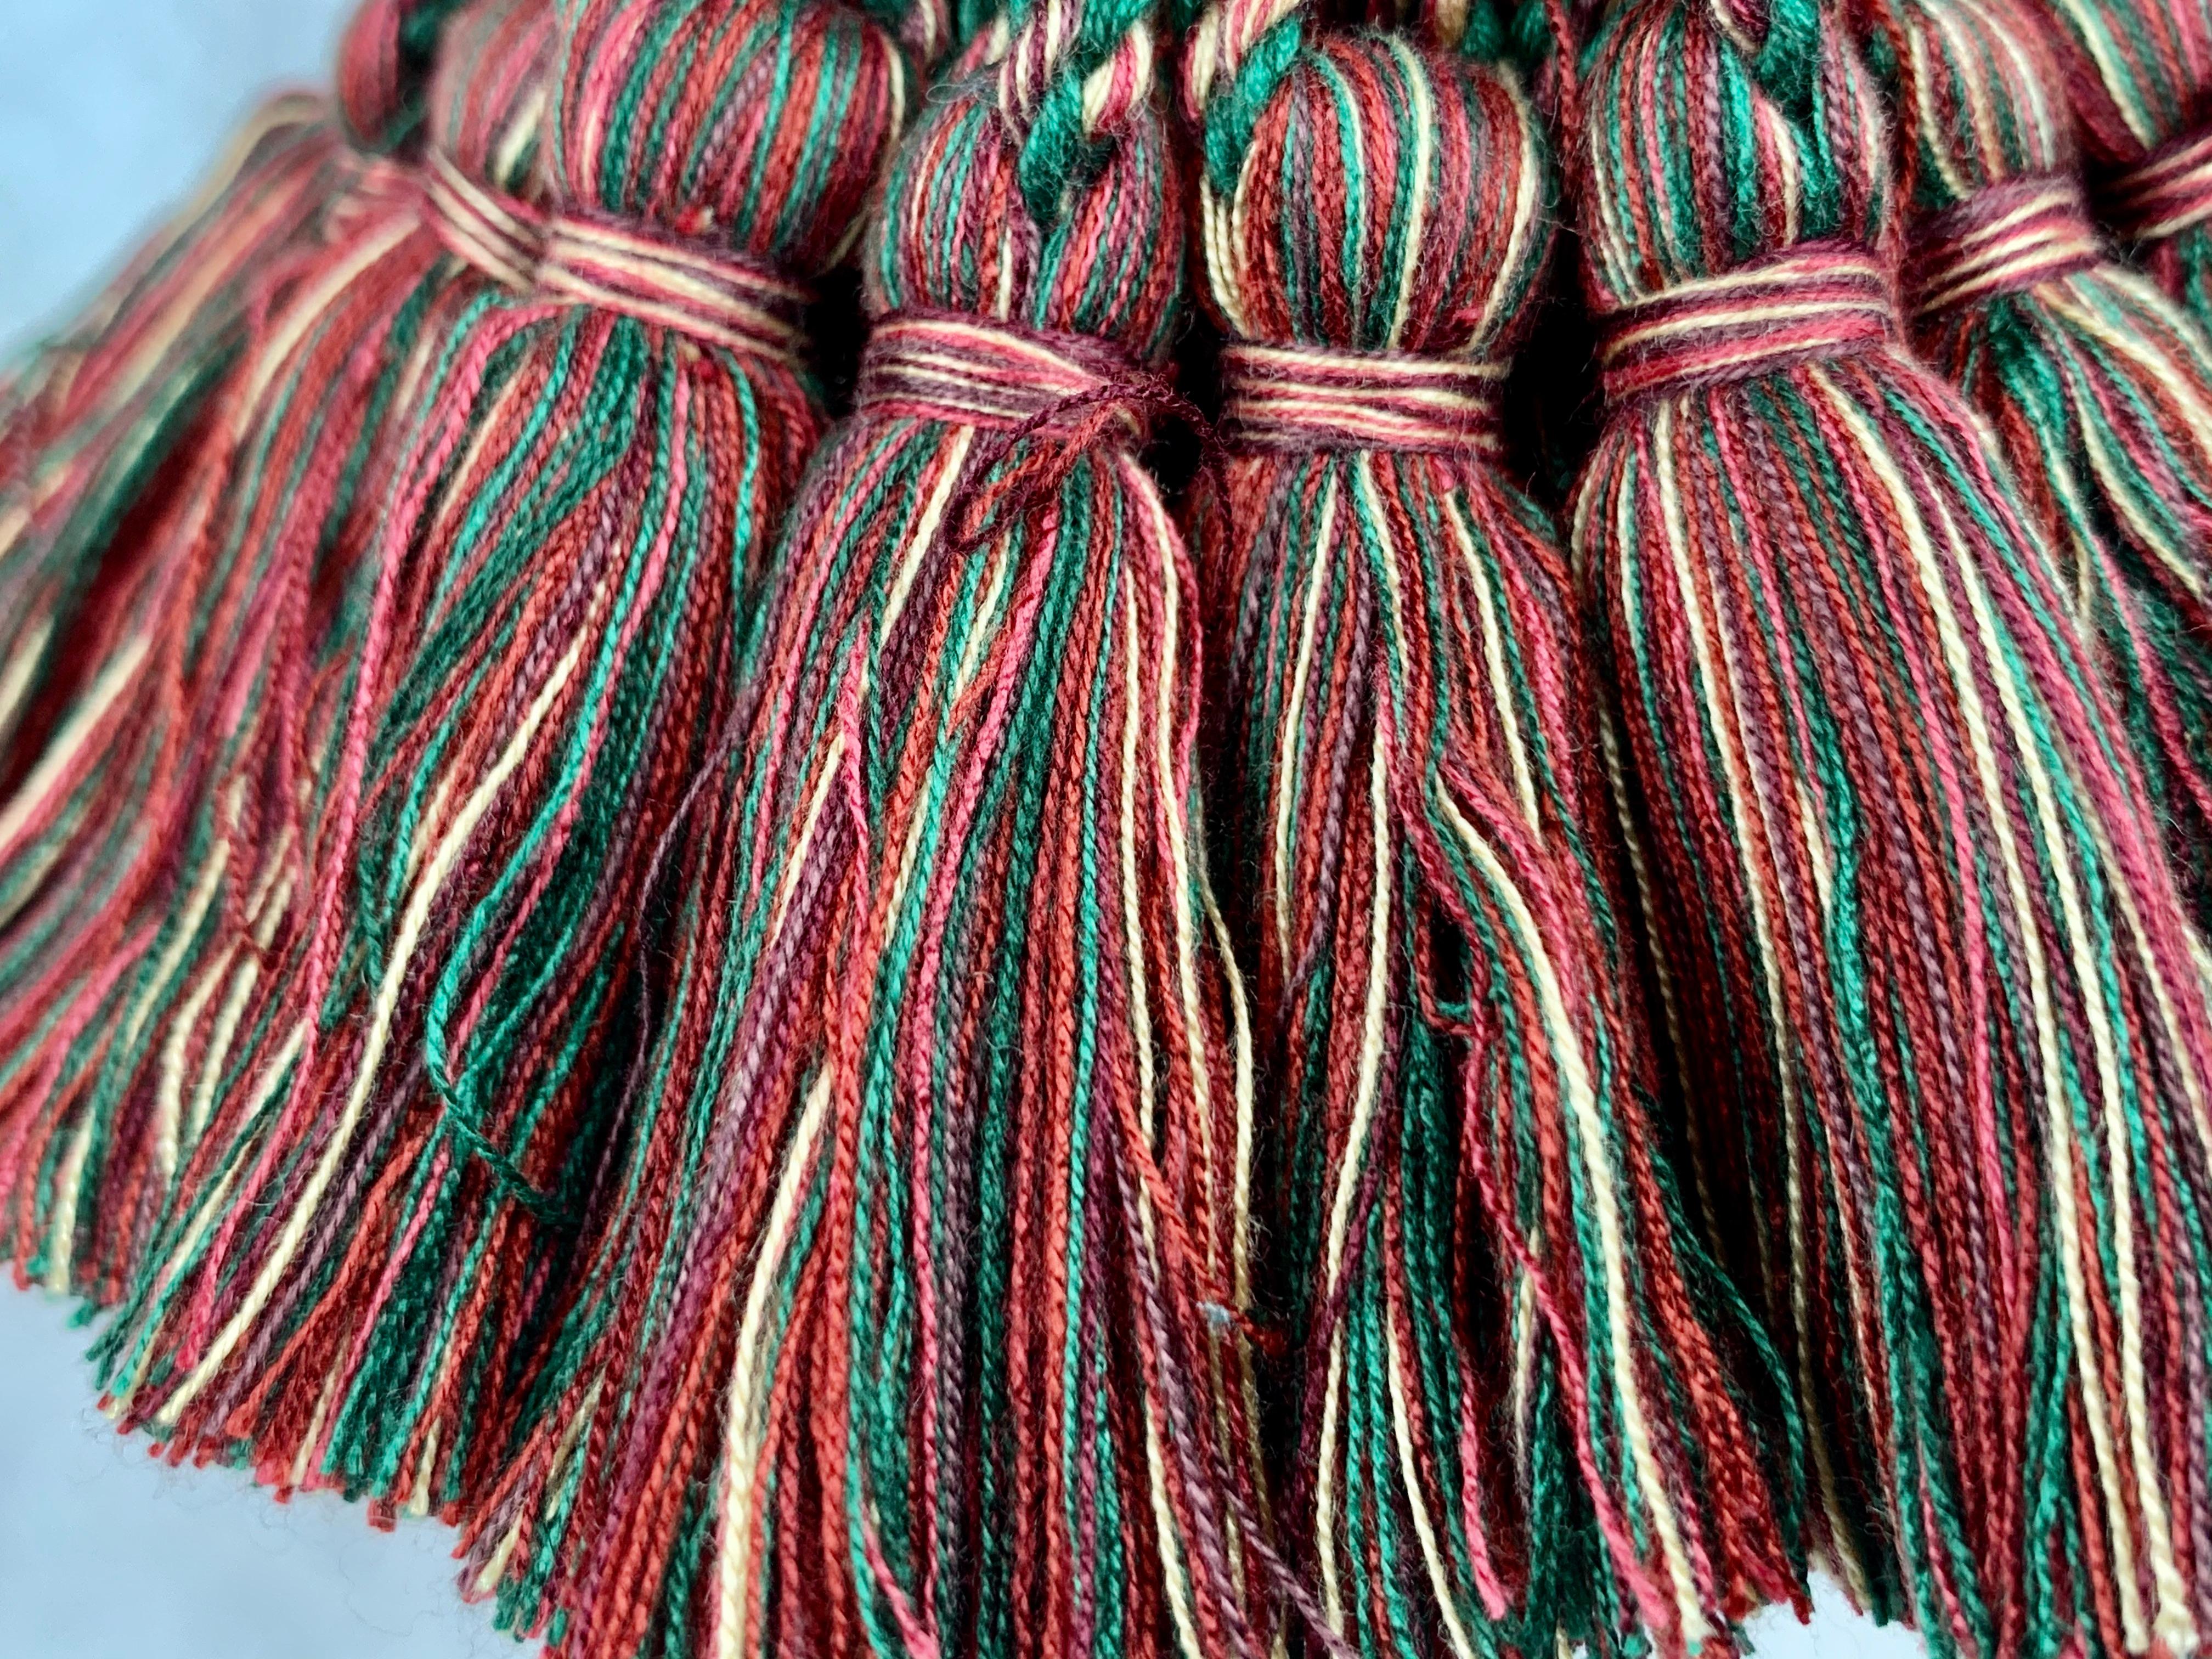 Hand-Crafted  Large Gland Clé (Key Tassel) Red/Green by Houlés Passementerie of Paris 